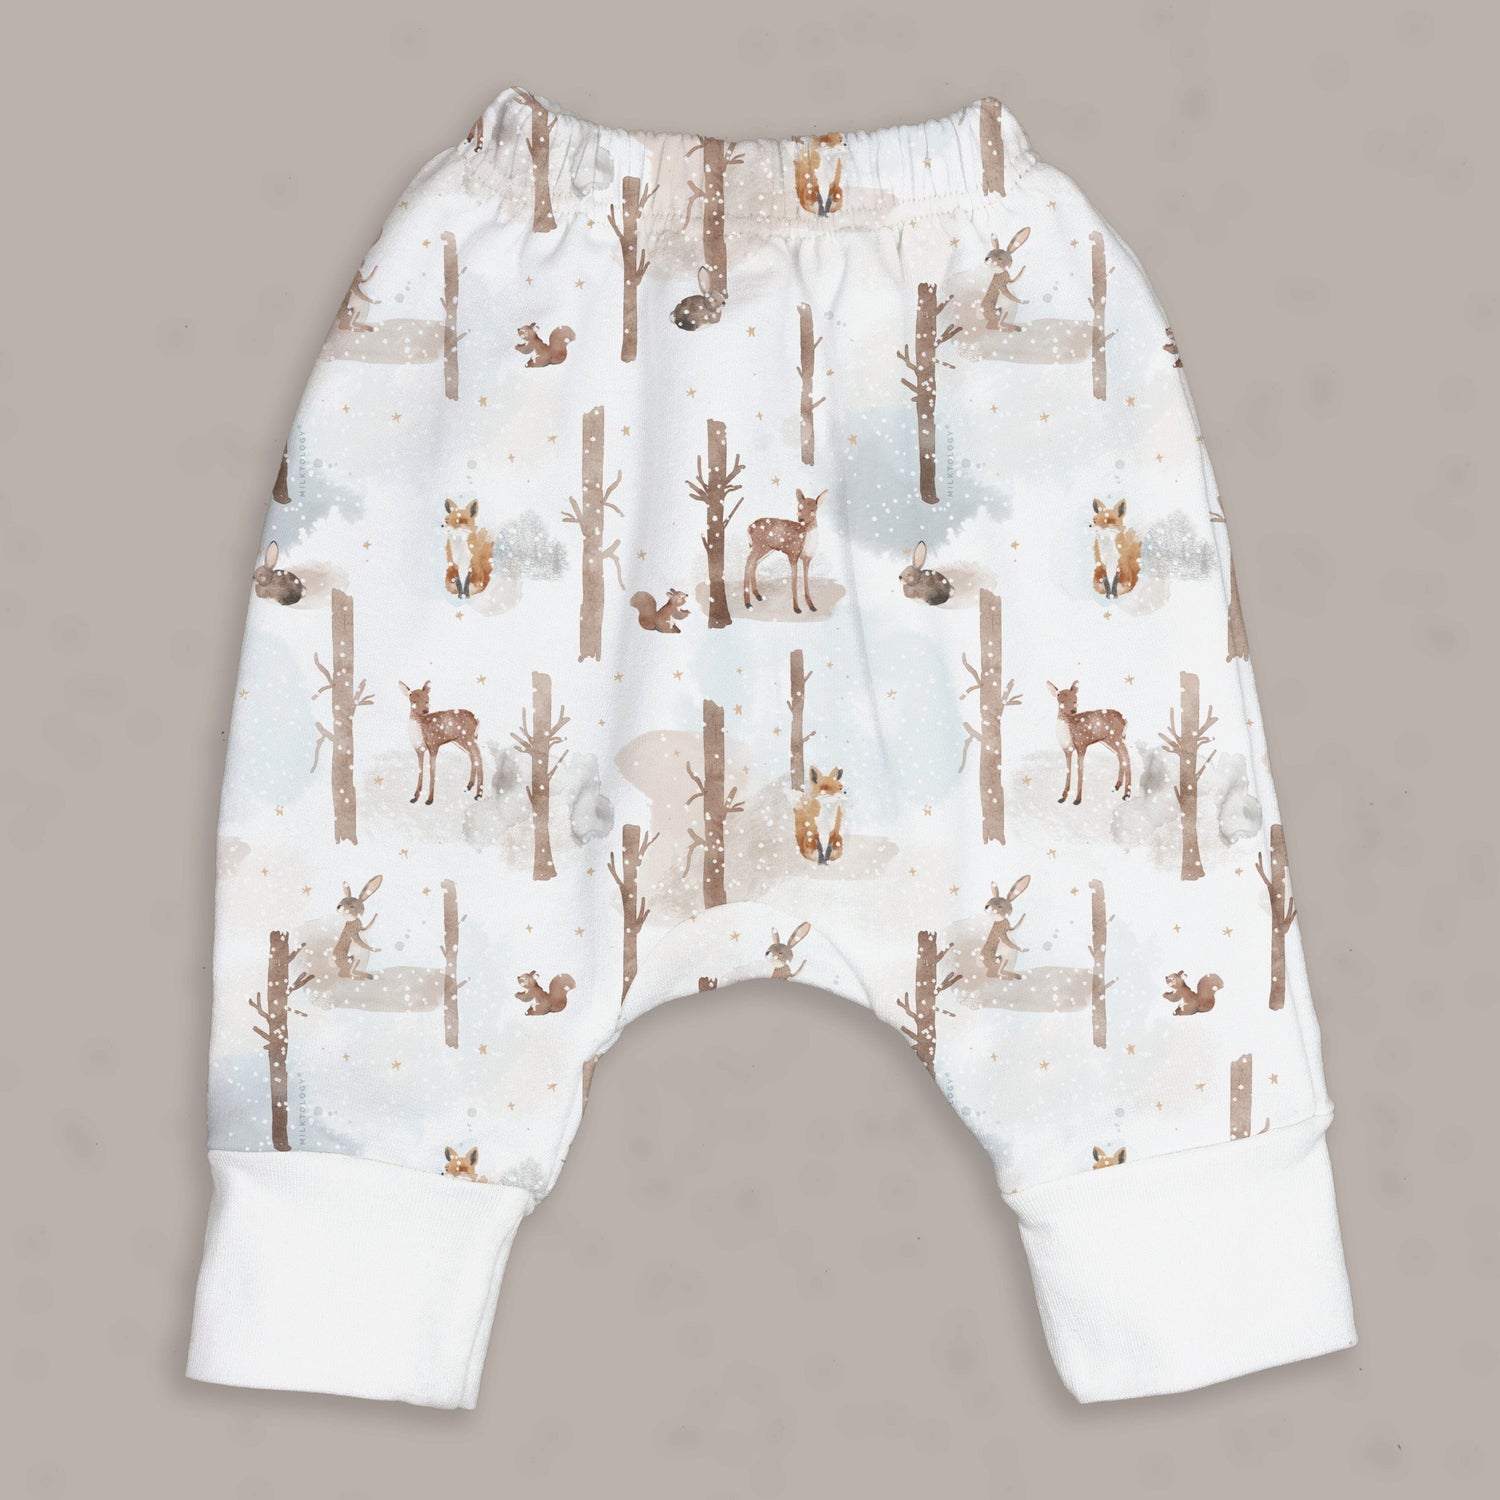 In The Woods Pants 130 BABY BOYS/NEUTRAL APPAREL Milktology 3m 